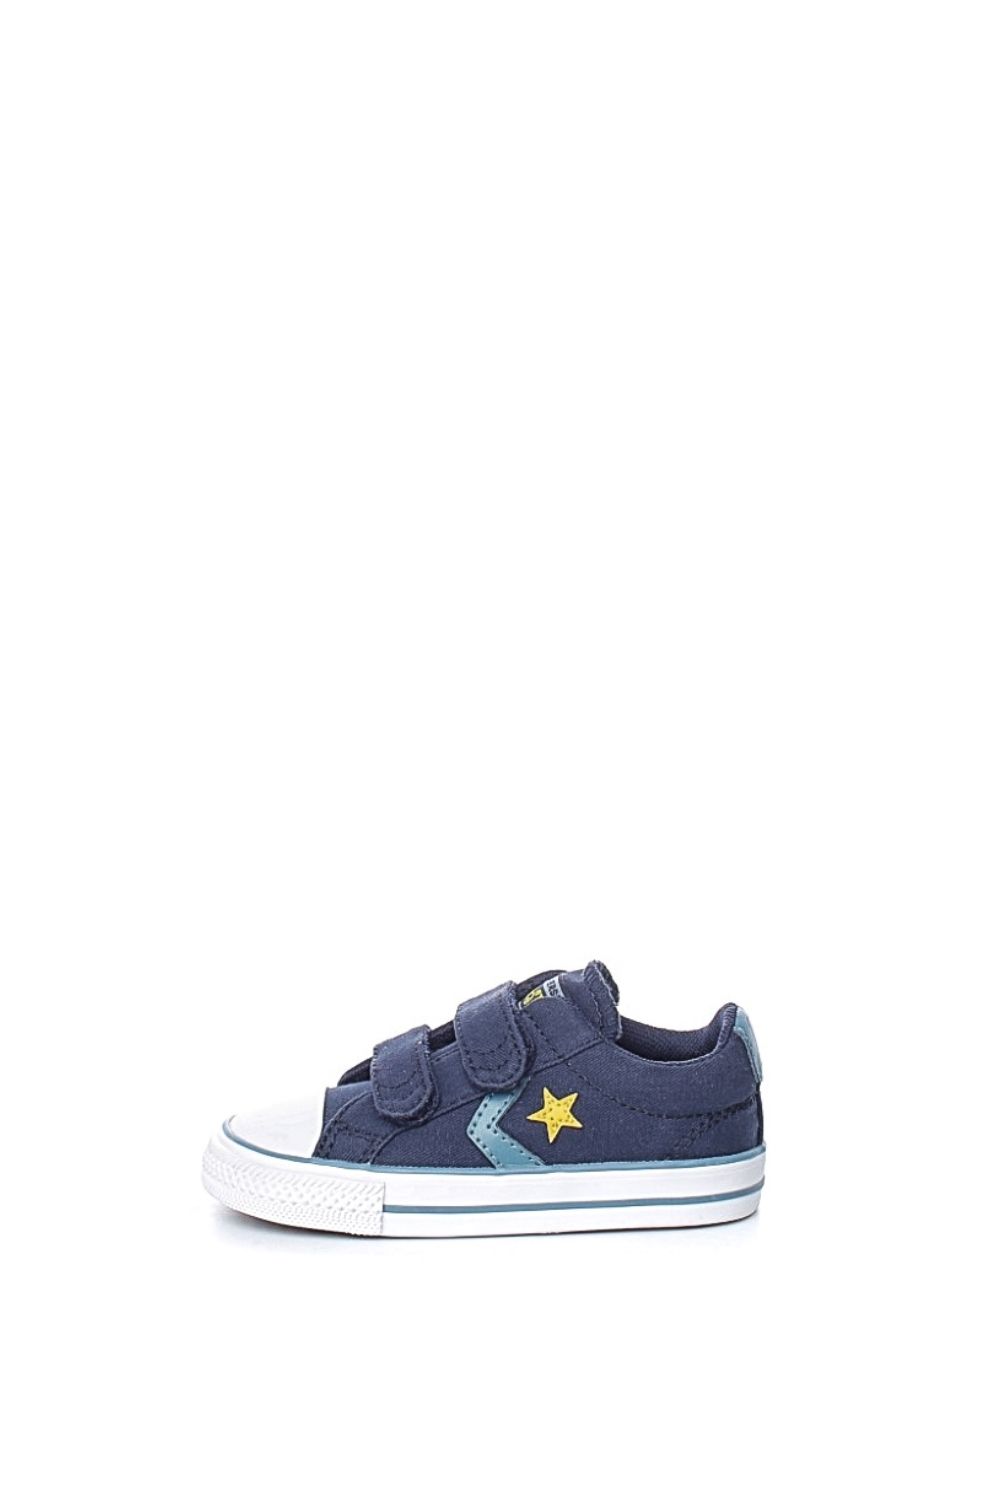 CONVERSE - Βρεφικά sneakers Star Player 2V Ox μπλε Παιδικά/Baby/Παπούτσια/Sneakers